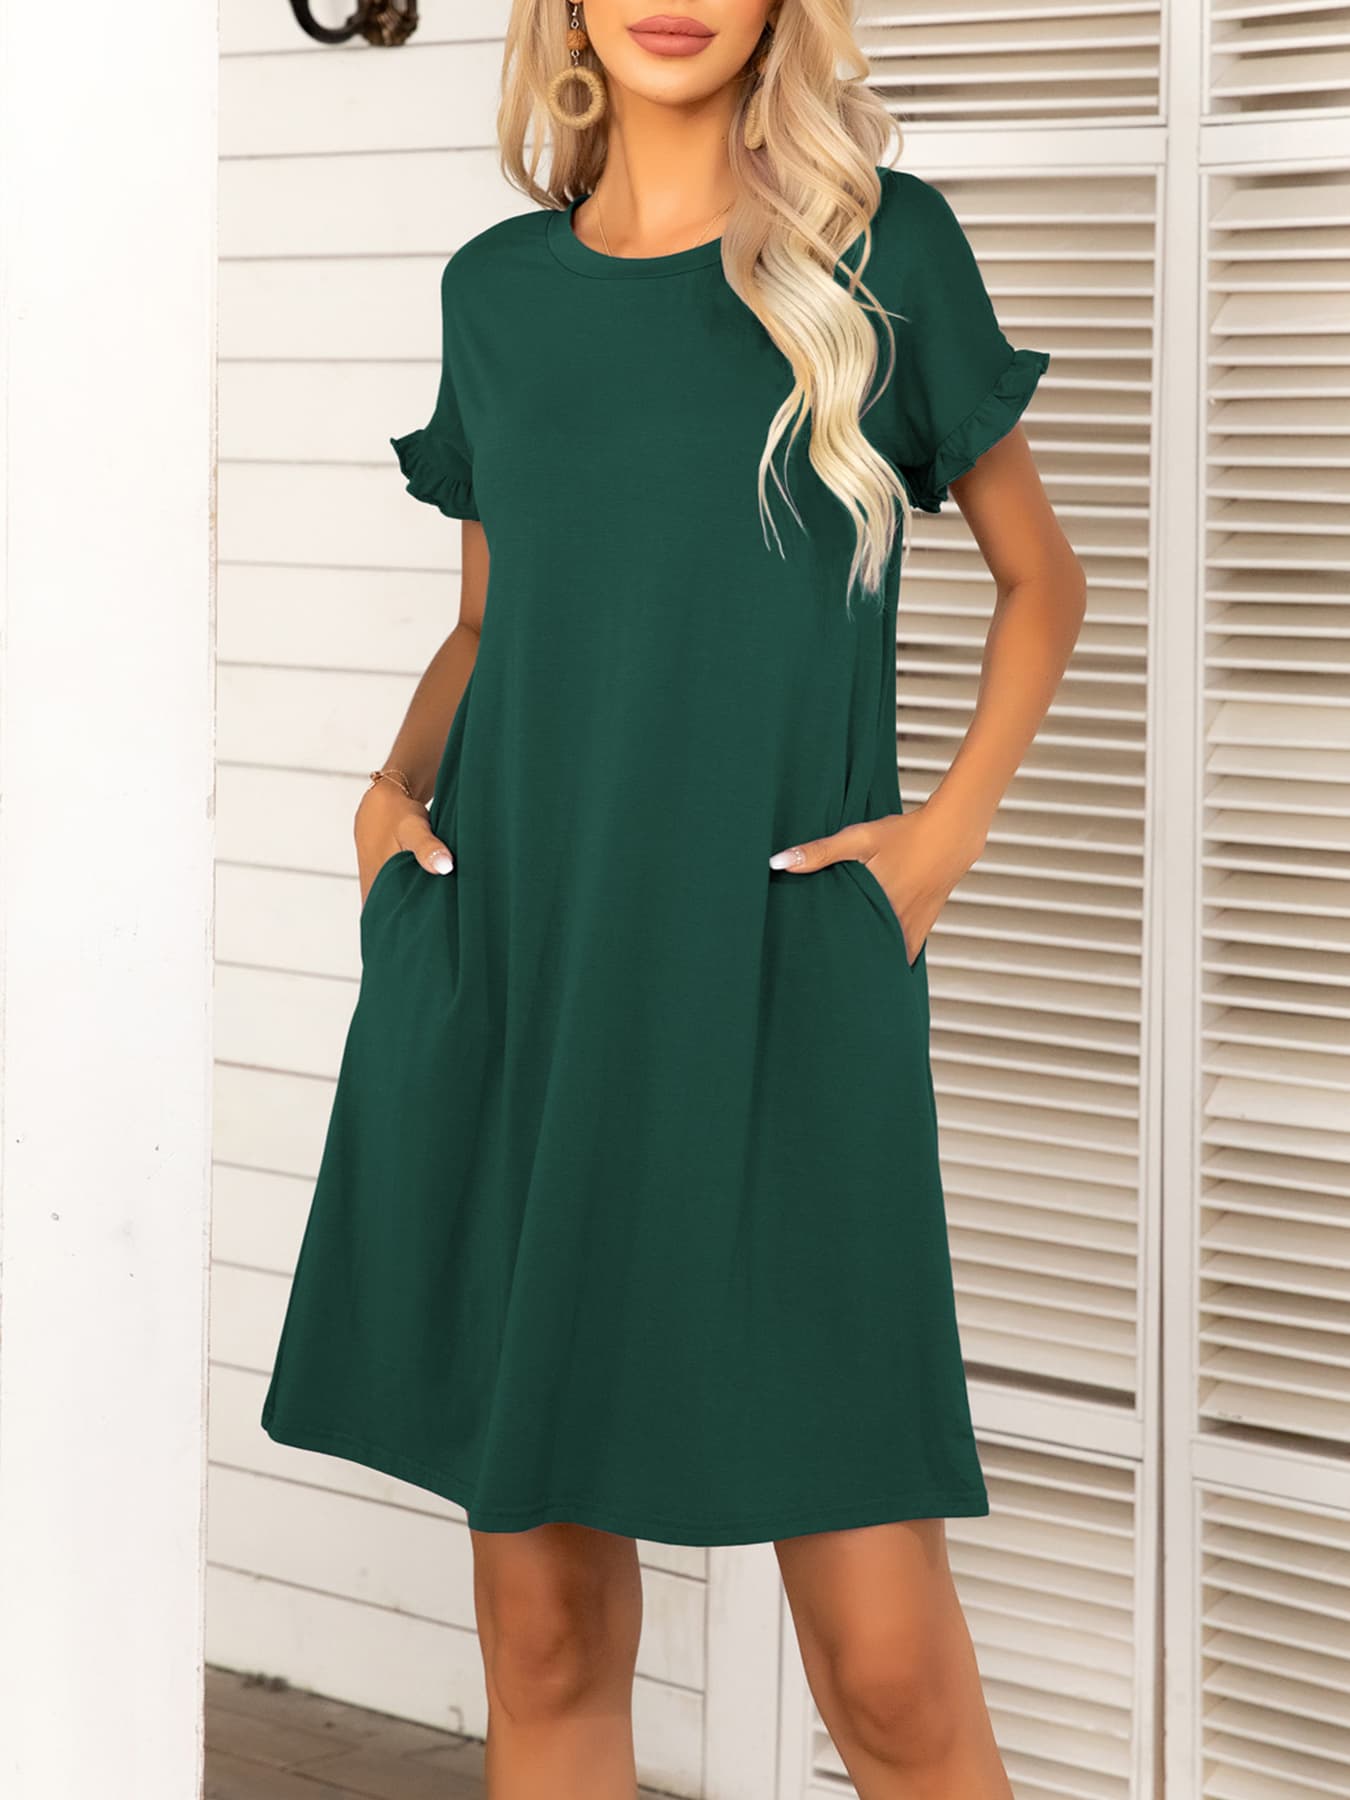 Round Neck Flounce Sleeve Dress with Pockets (6 Colors)  Krazy Heart Designs Boutique   